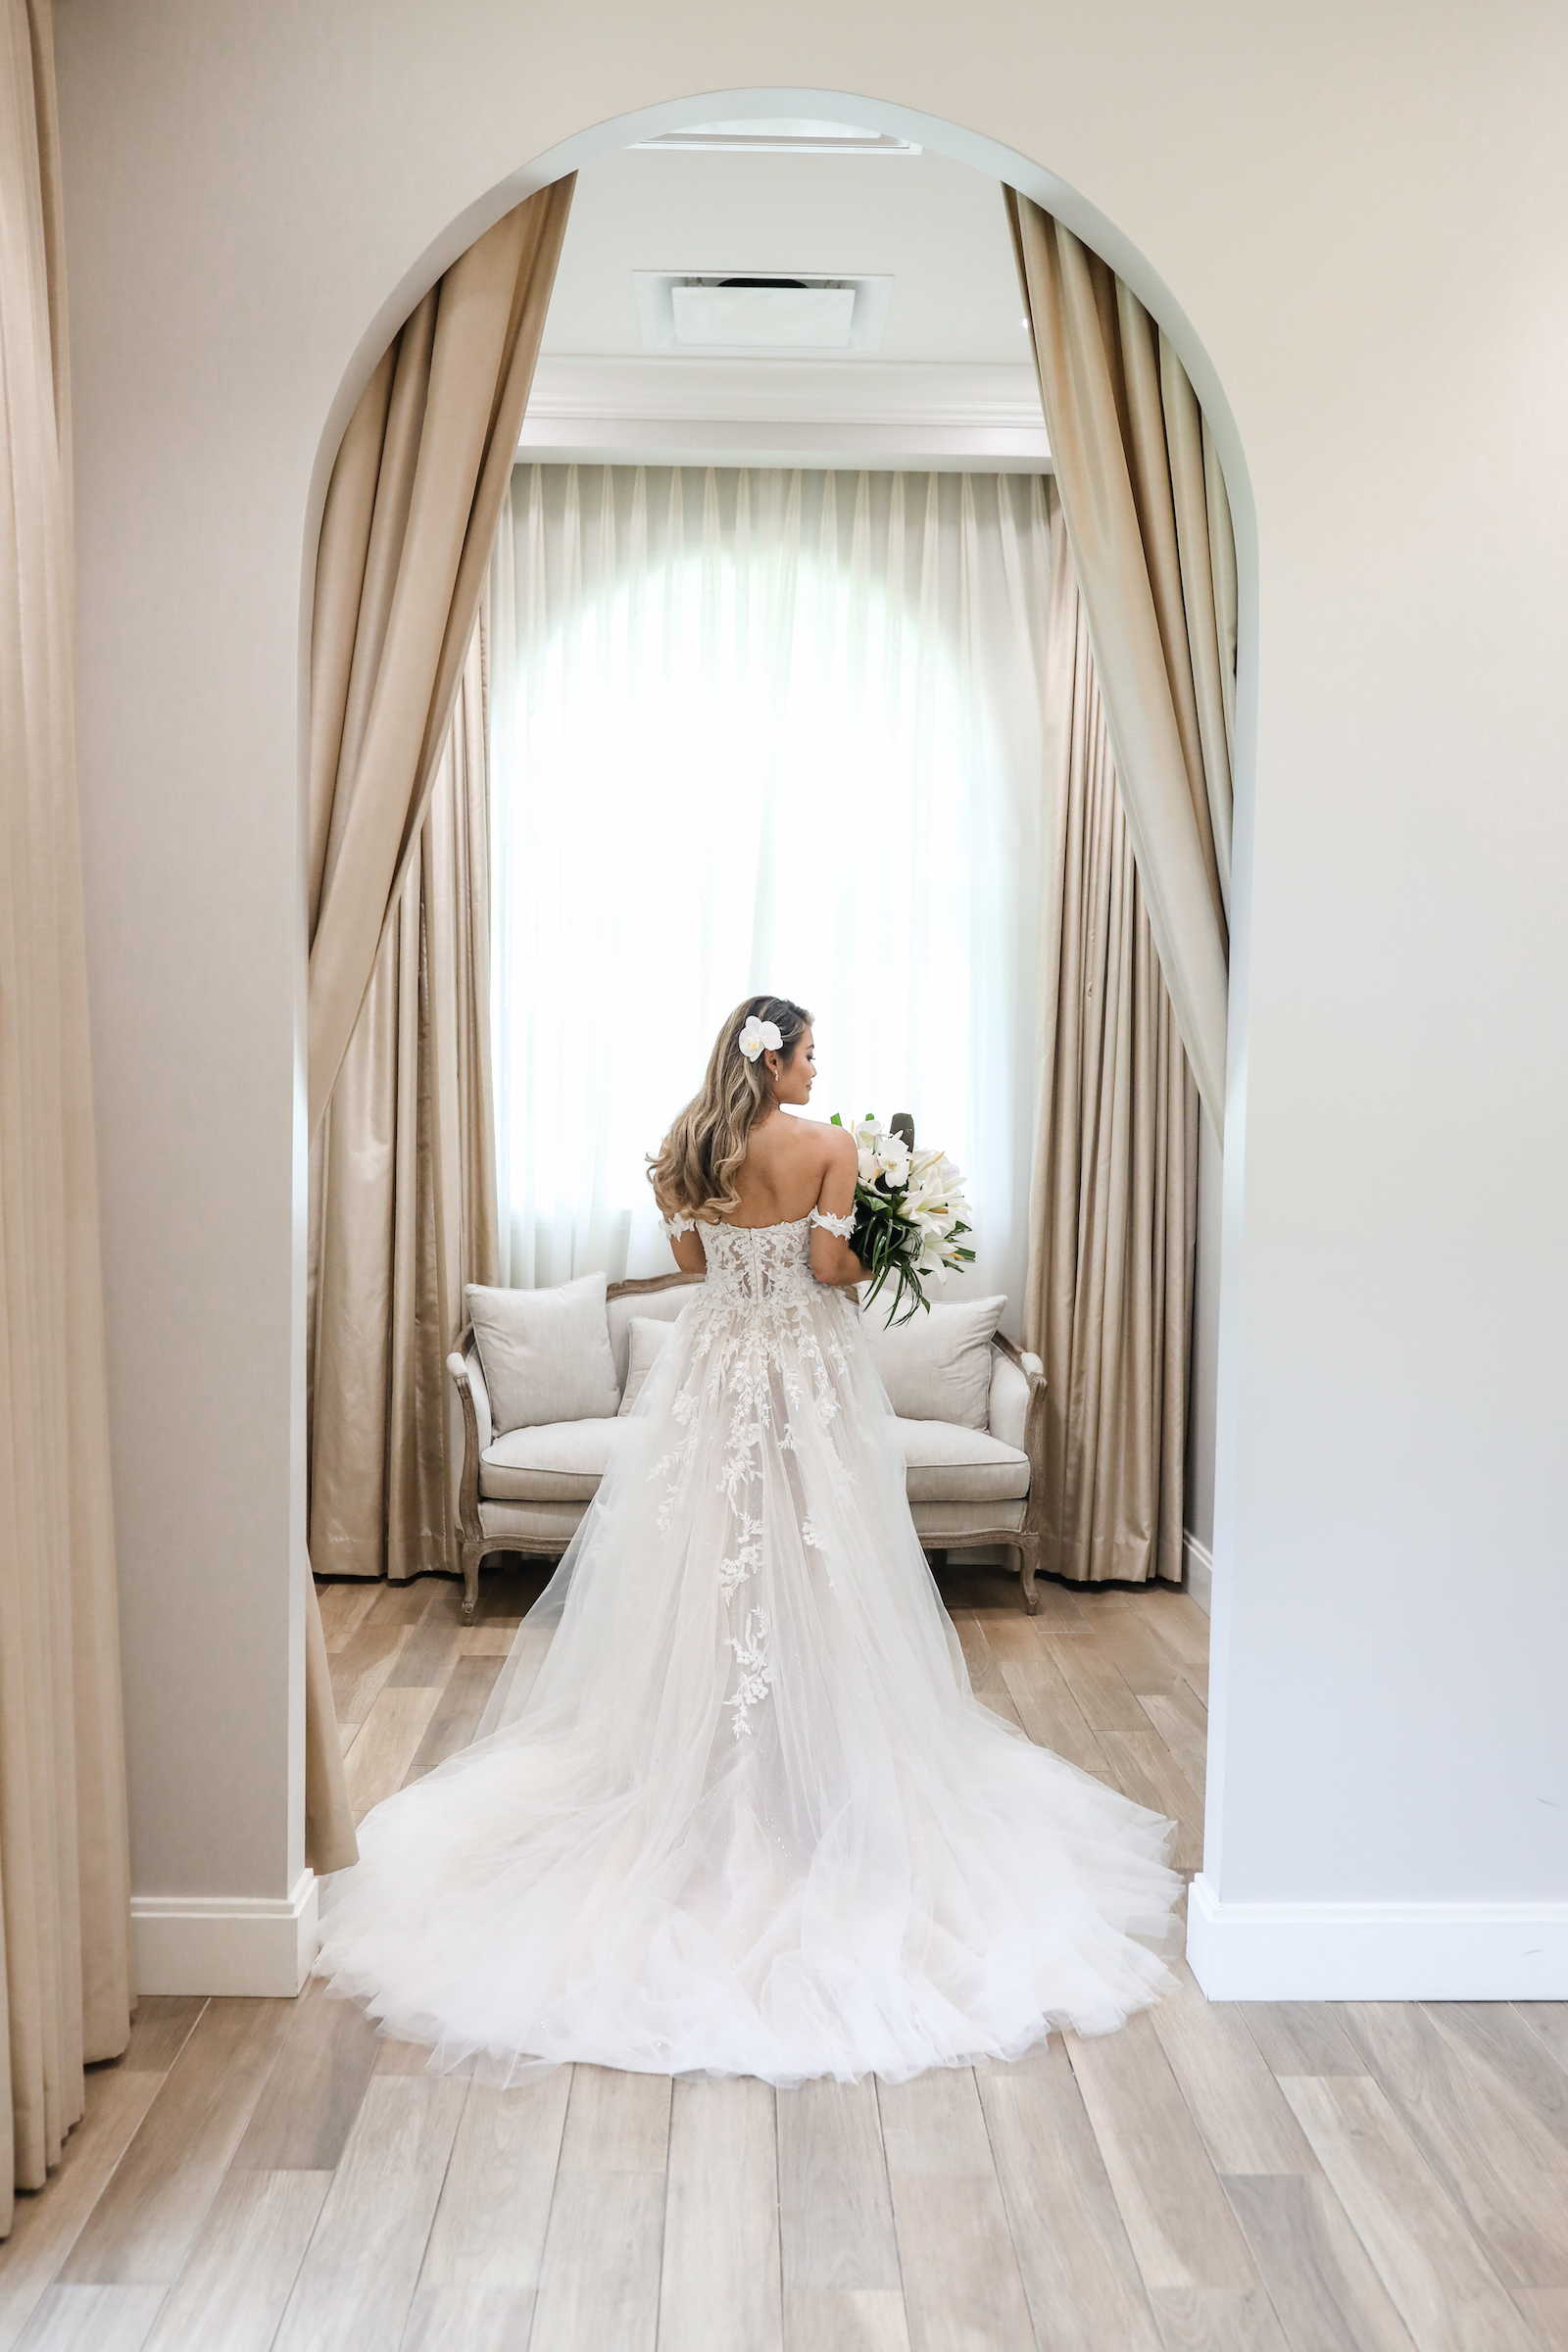 Bridal Portrait of Modern Bride with Headpiece | Tampa Hair and Makeup Savannah Olivia Beauty Boutique | Tampa Photographer Lifelong Photography | Harborside Chapel